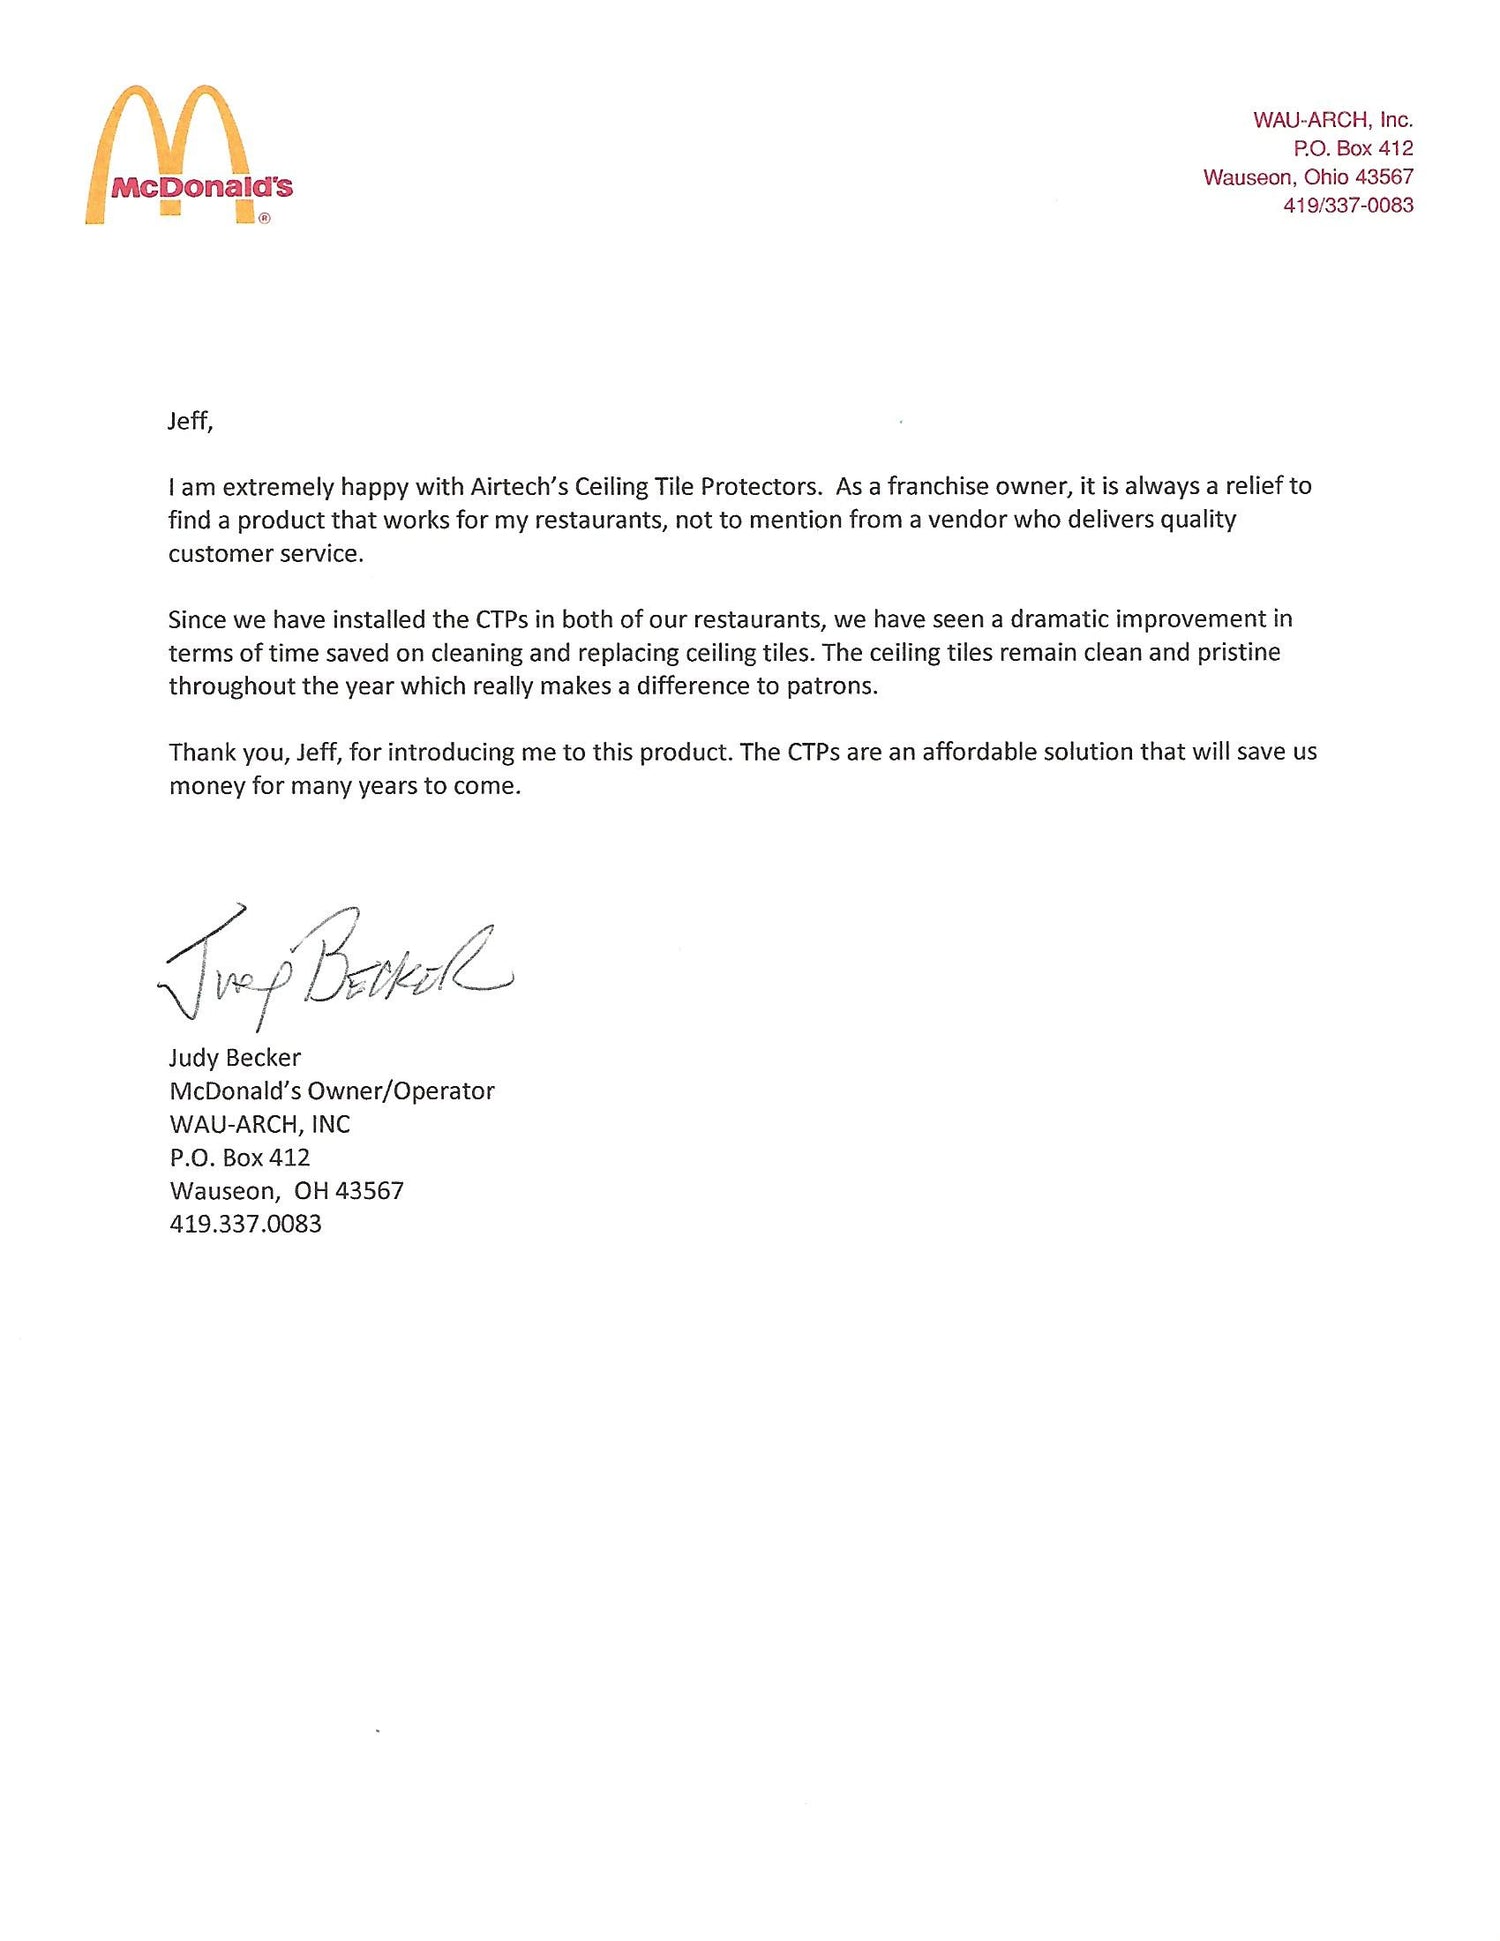 Letter from McDonald’s owner/operator Judy Becker containing review of Ceiling Tile Protectors